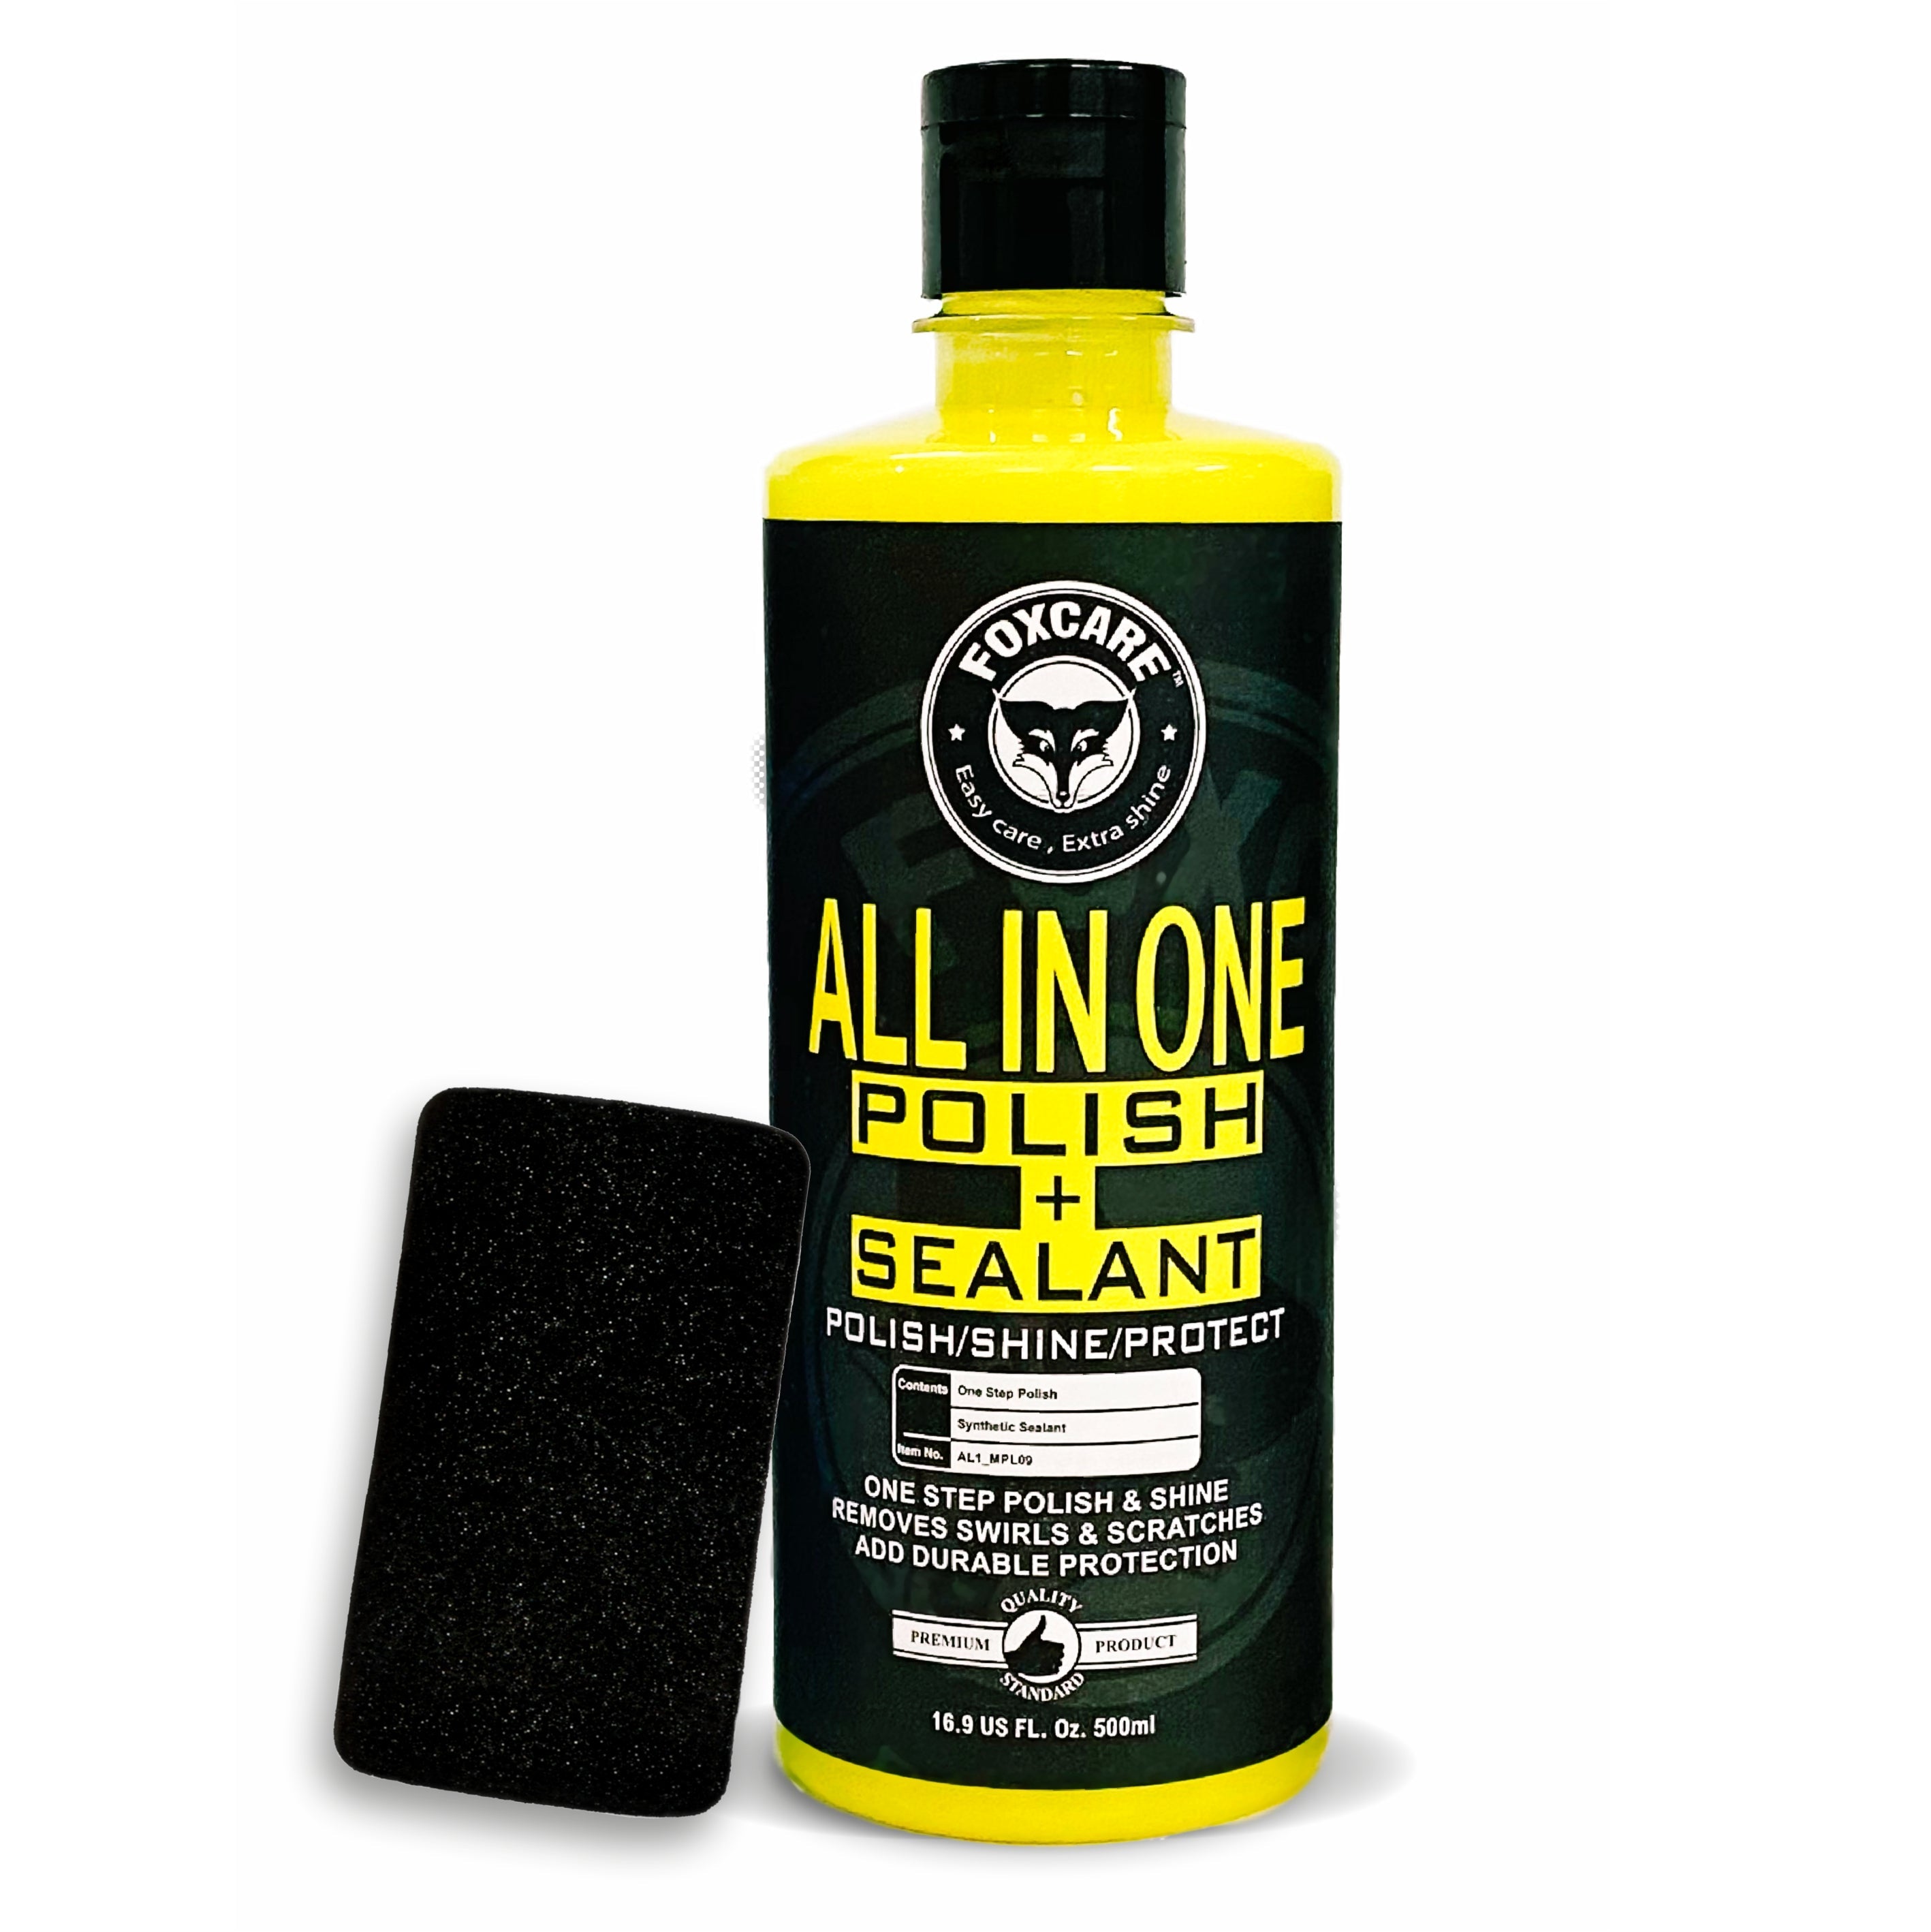 Foxcare All in one Polish + Sealant - 500ml